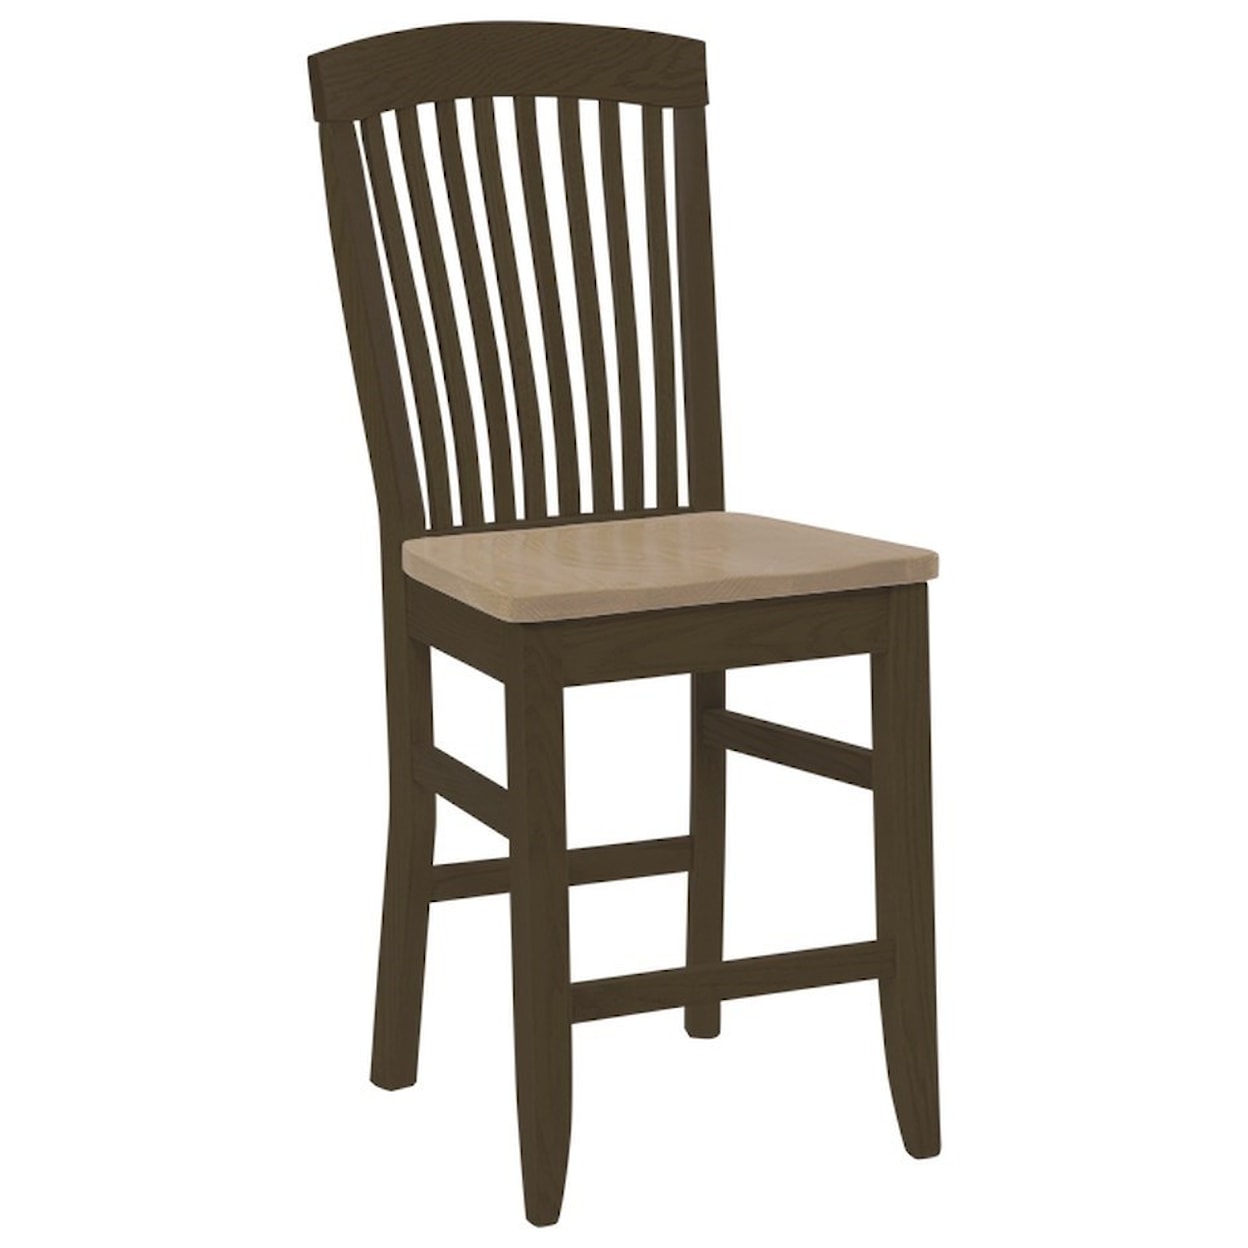 Daniel's Amish Chairs and Barstools Empire Stationary Counter Chair